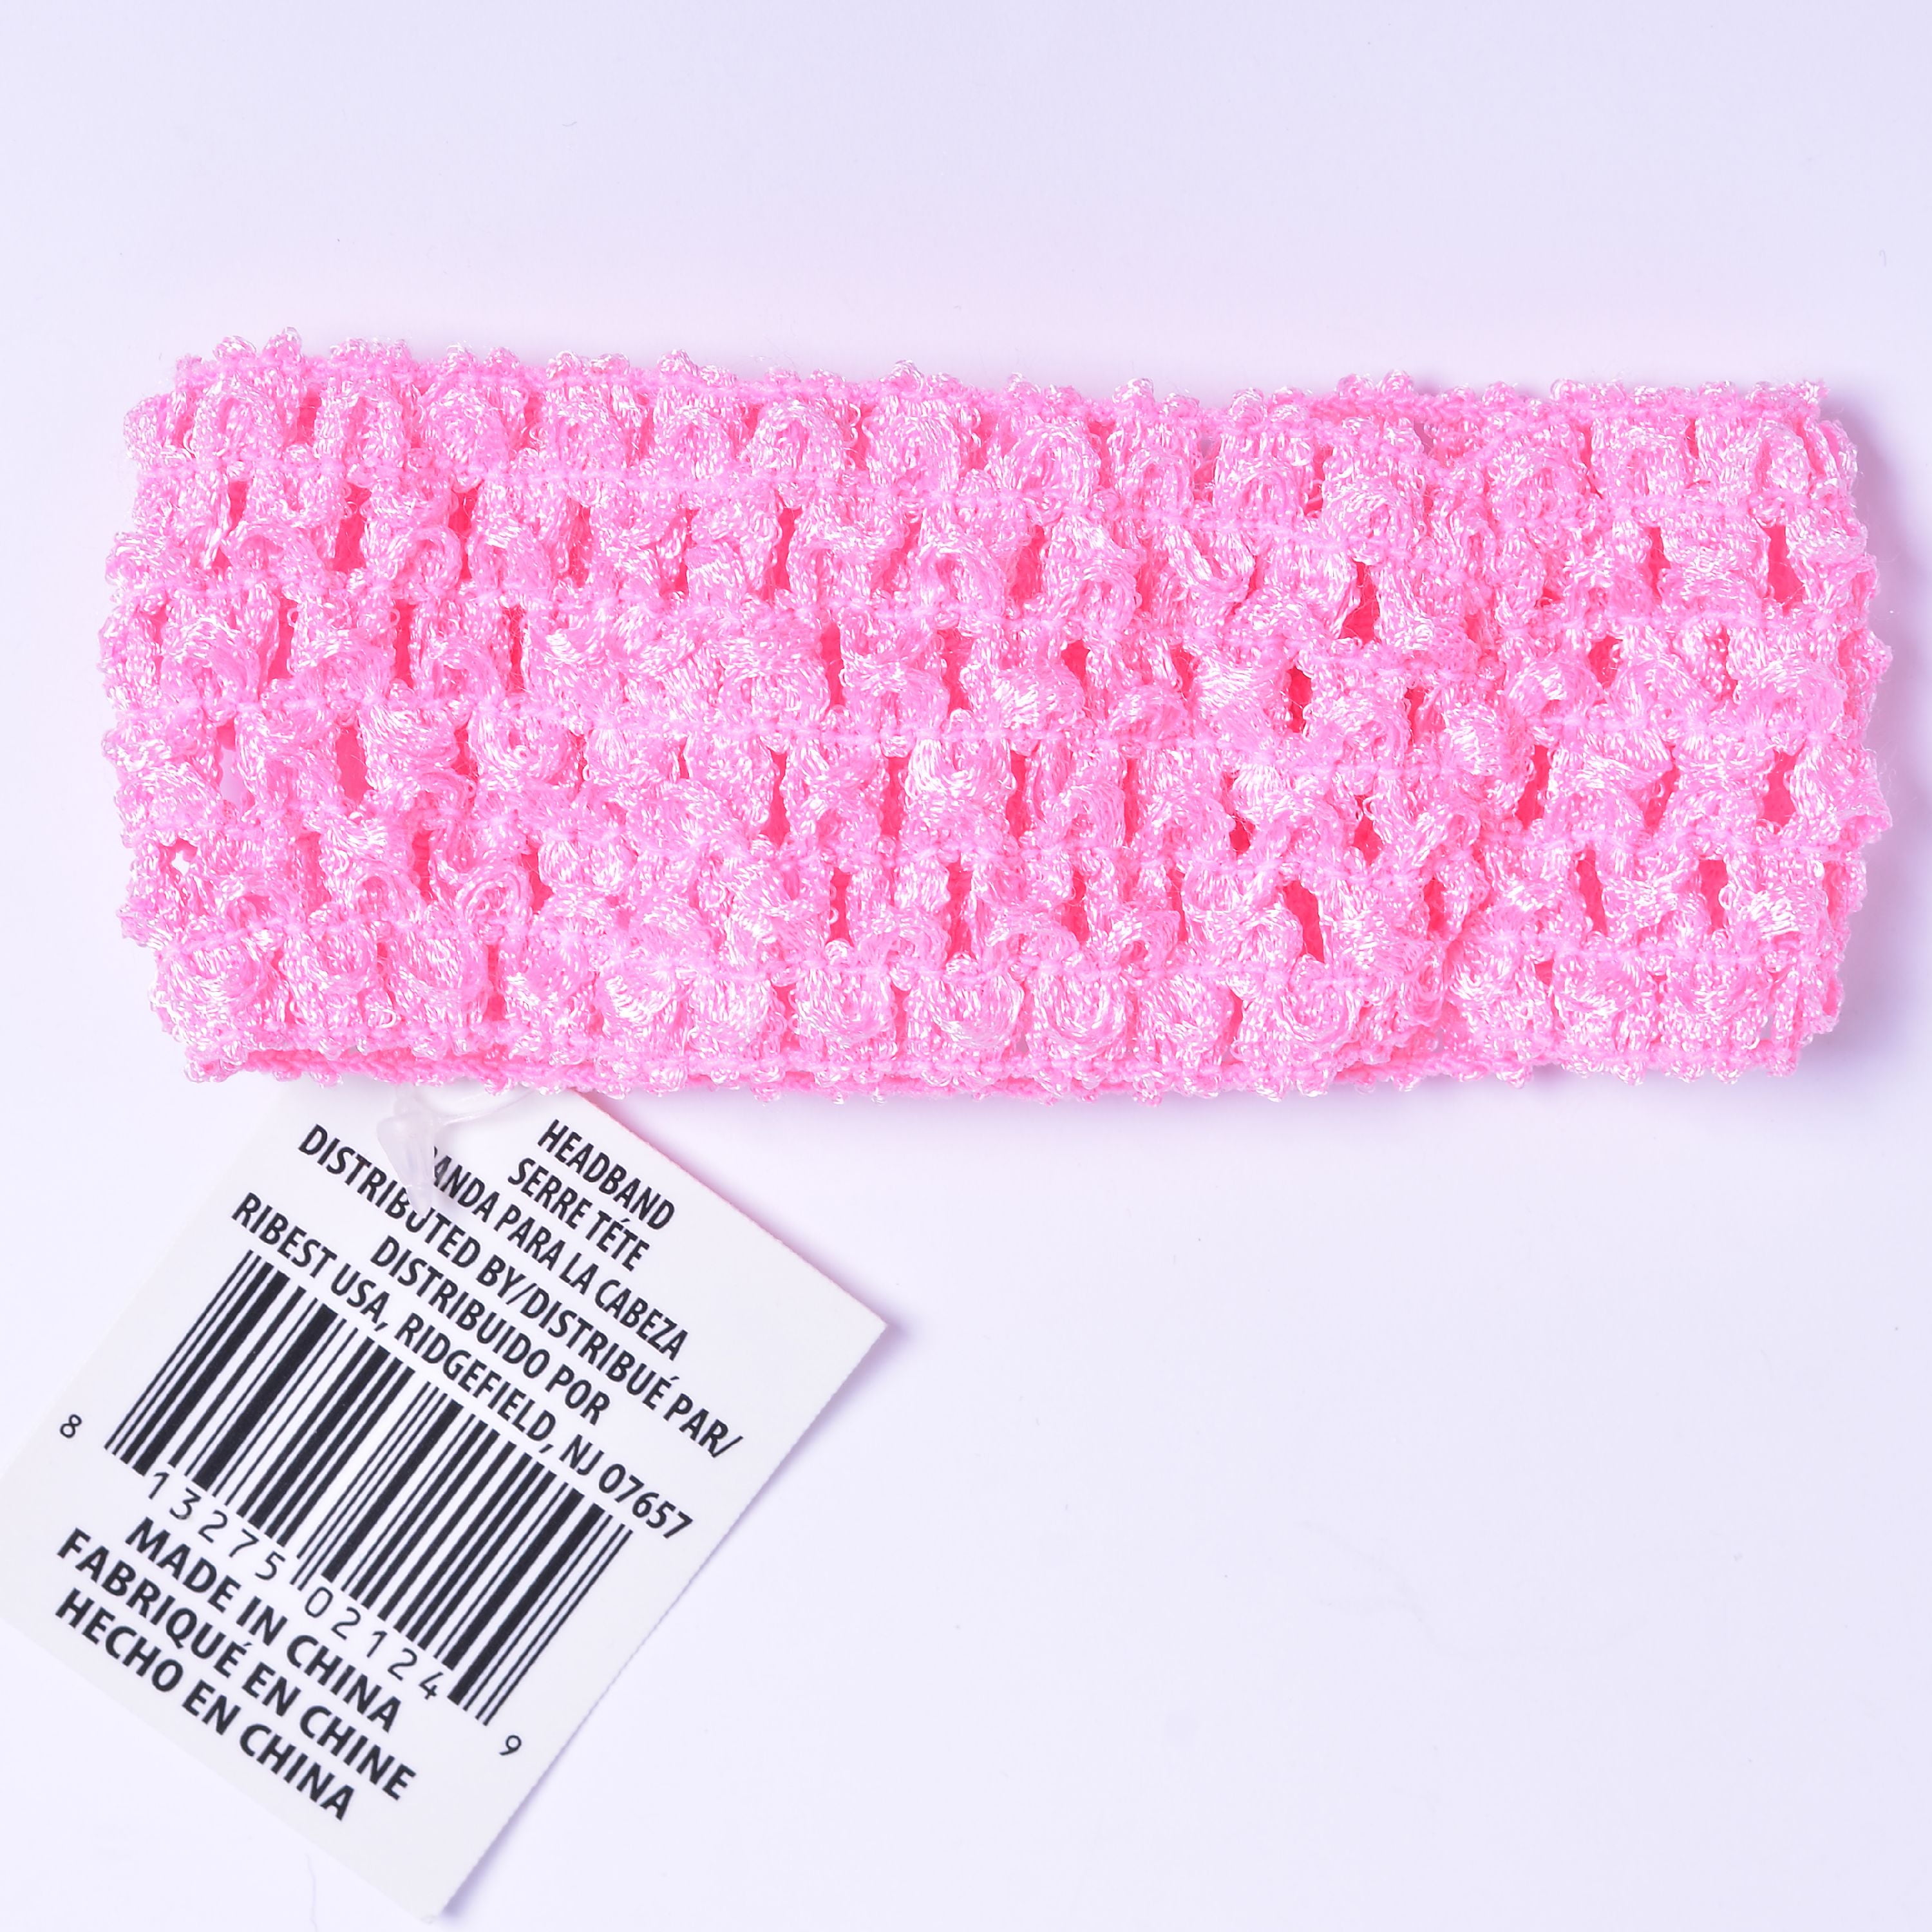 20 pcs Girls Crochet Headband With 1.5 inch Acrylic the color Pick up. 